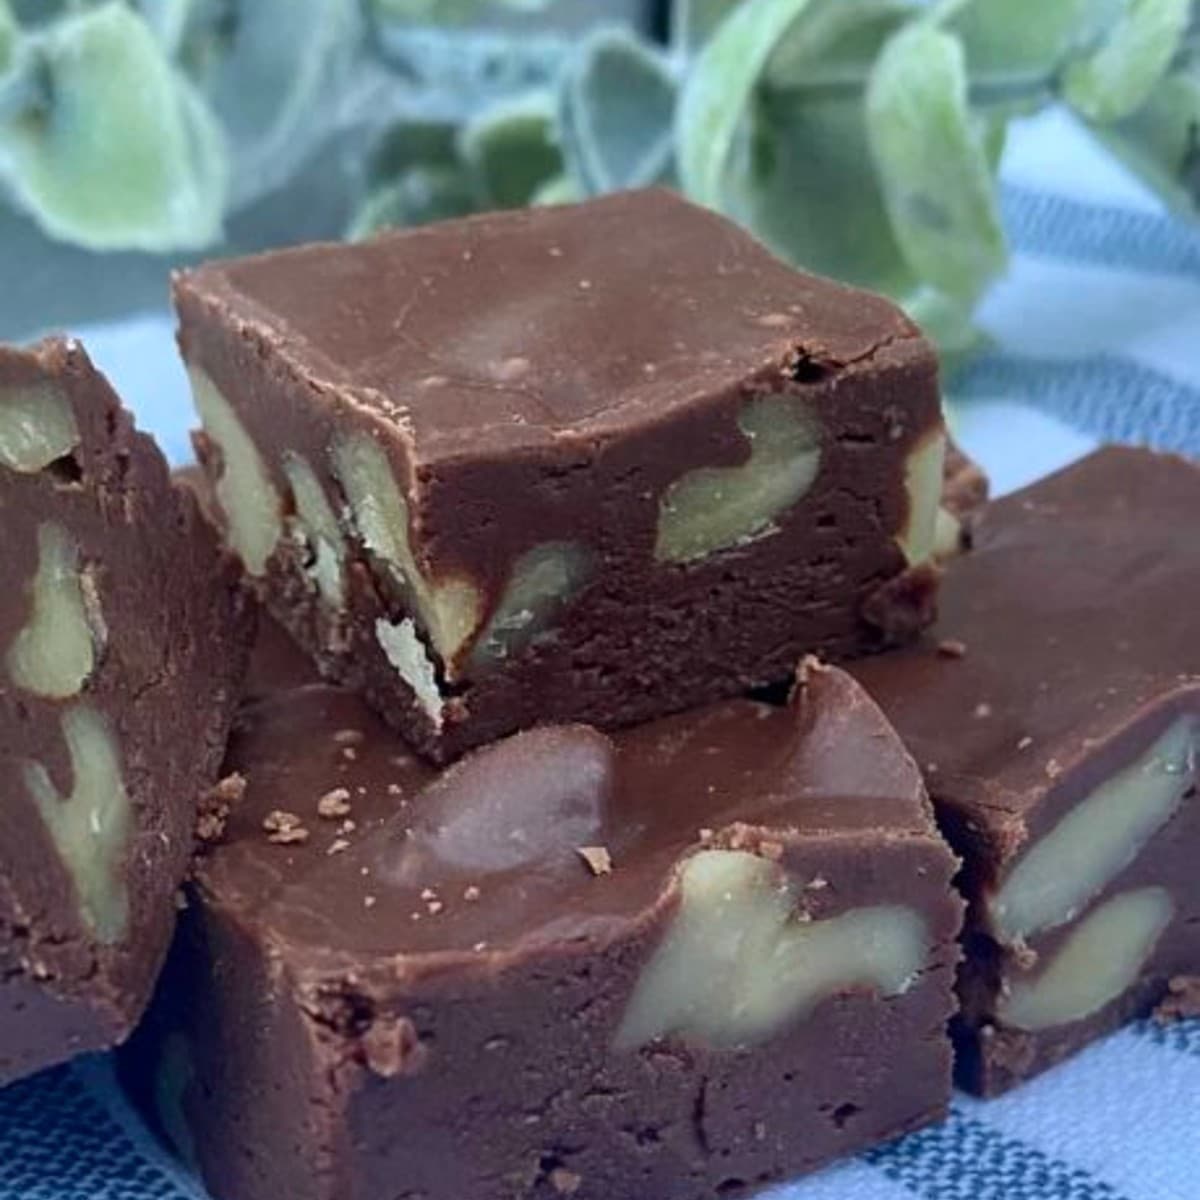 A close-up photo of a stack of See's fudge squares of decadent, dark chocolate fudge. The fudge has a smooth, slightly glossy top and is generously scattered with chopped walnuts. The dark color of the fudge is contrasted by a white napkin visible underneath. This recipe can be made as a dairy free fudge recipe.